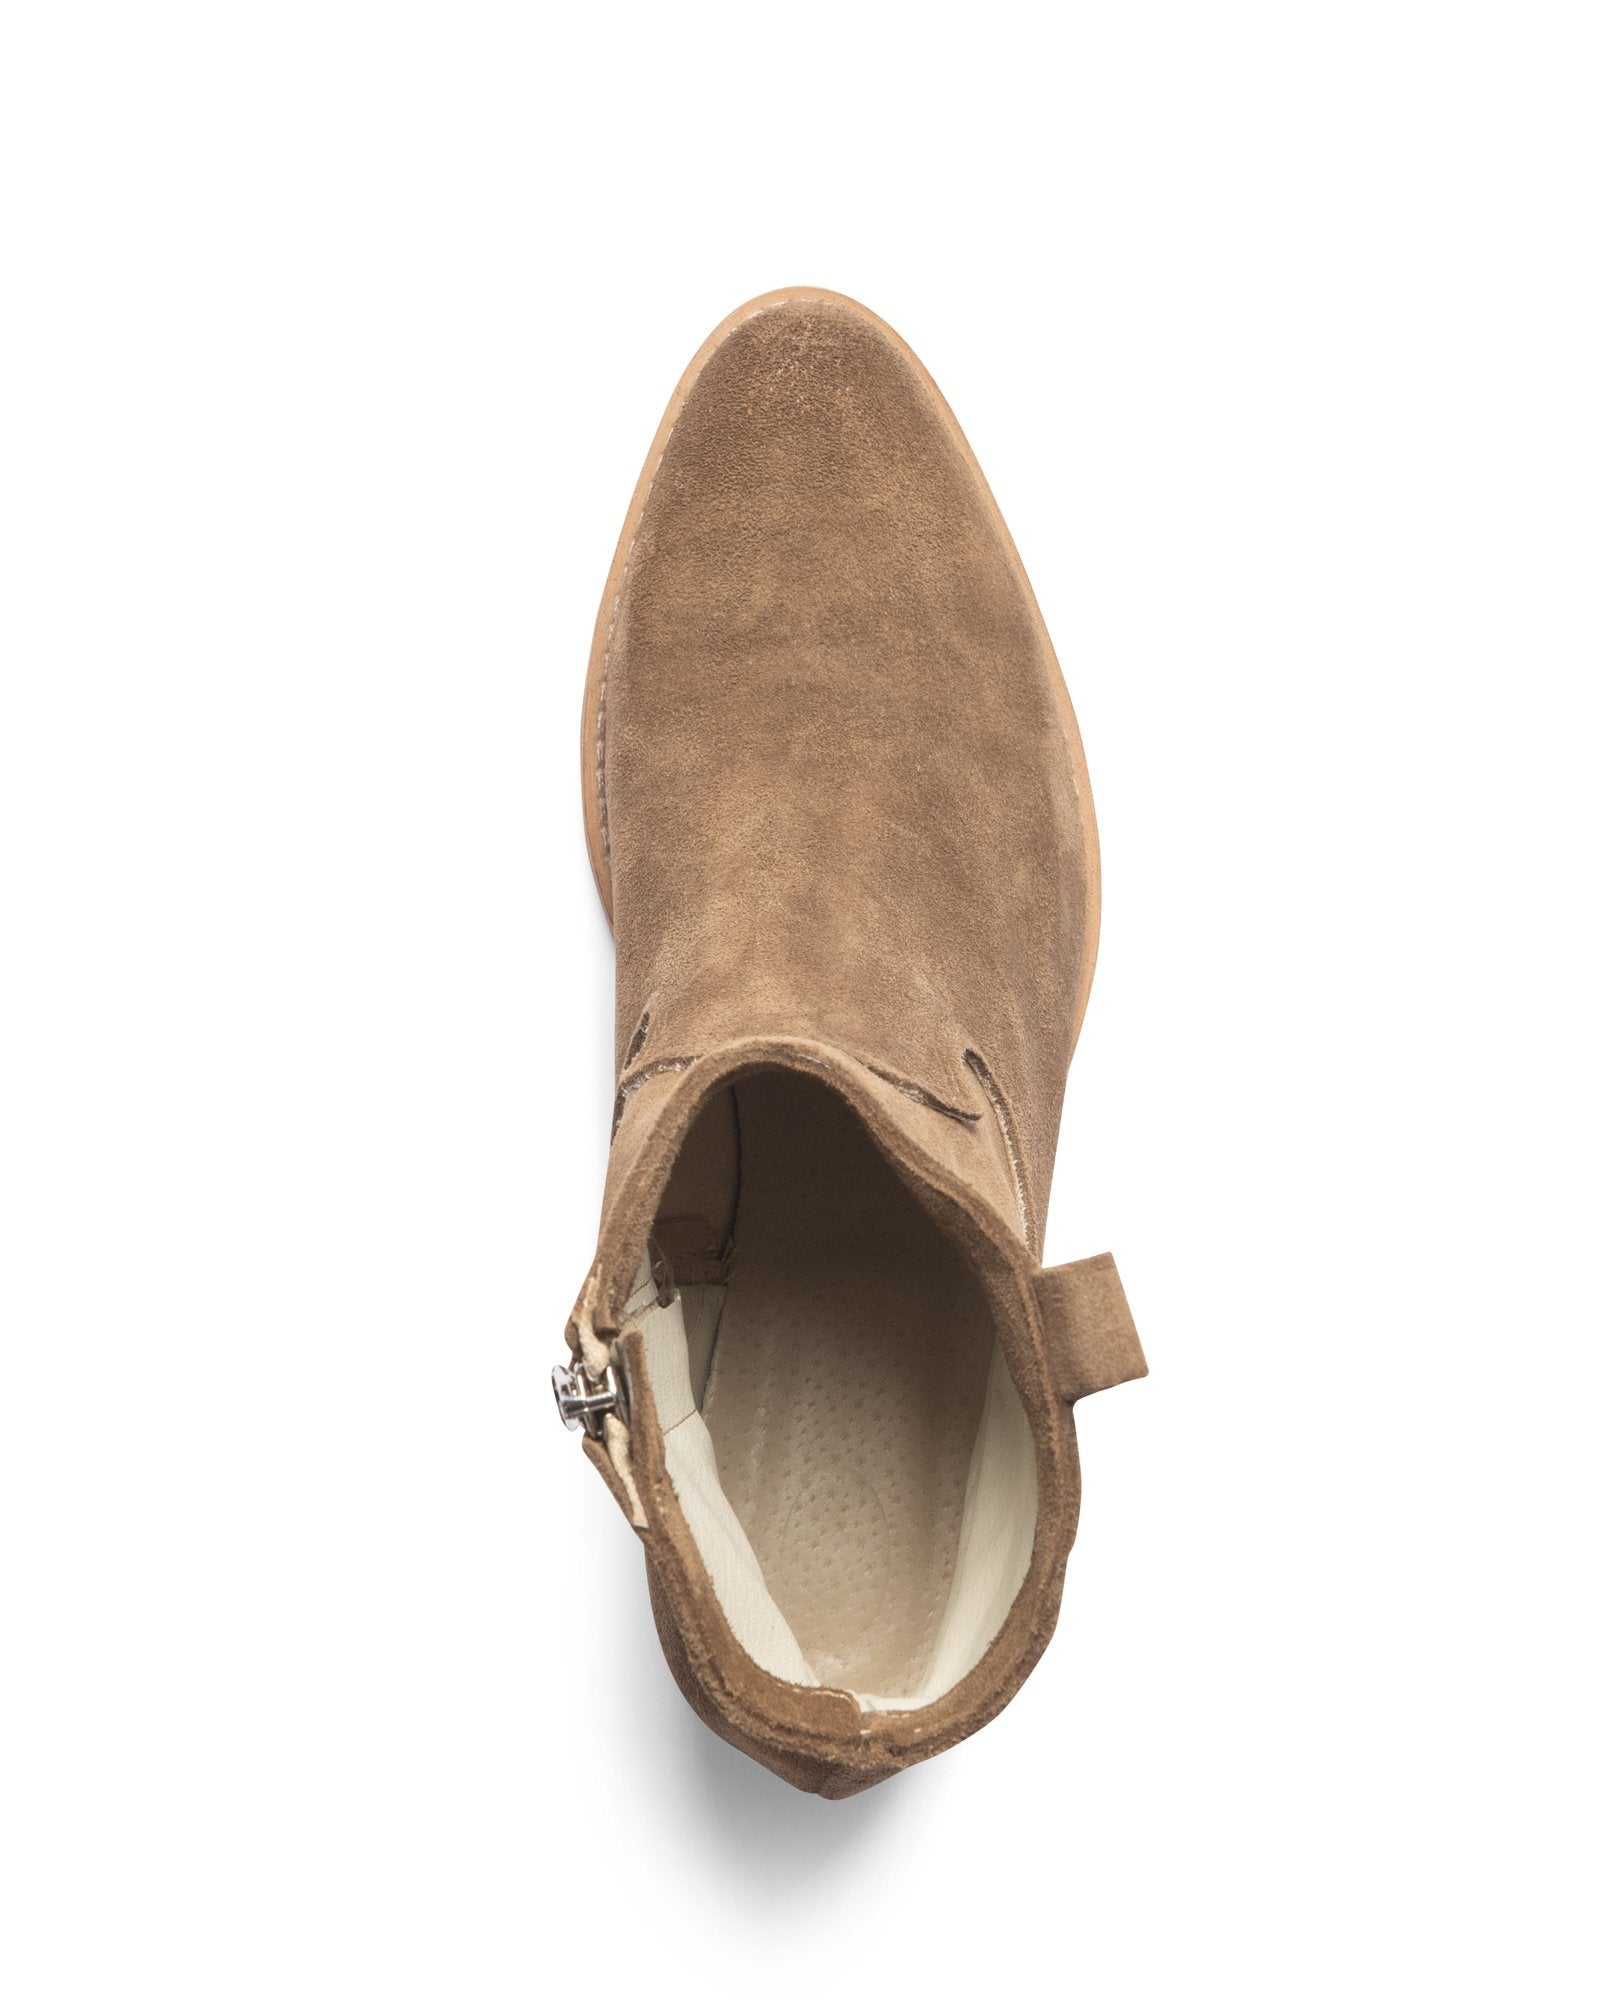 fiesta boot - taupe